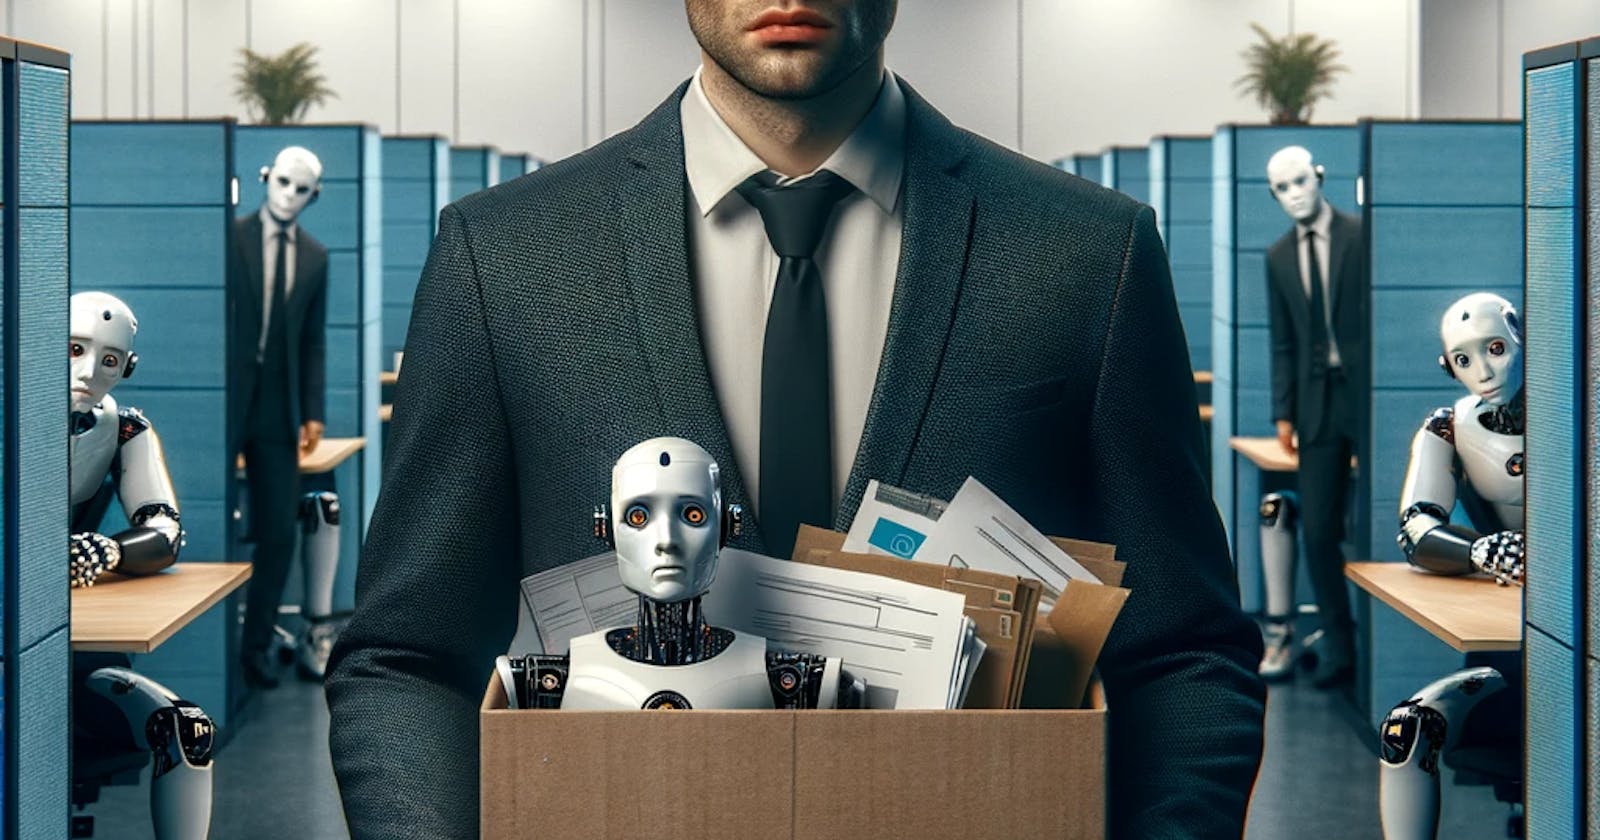 AI: The Future of Overworked Employees